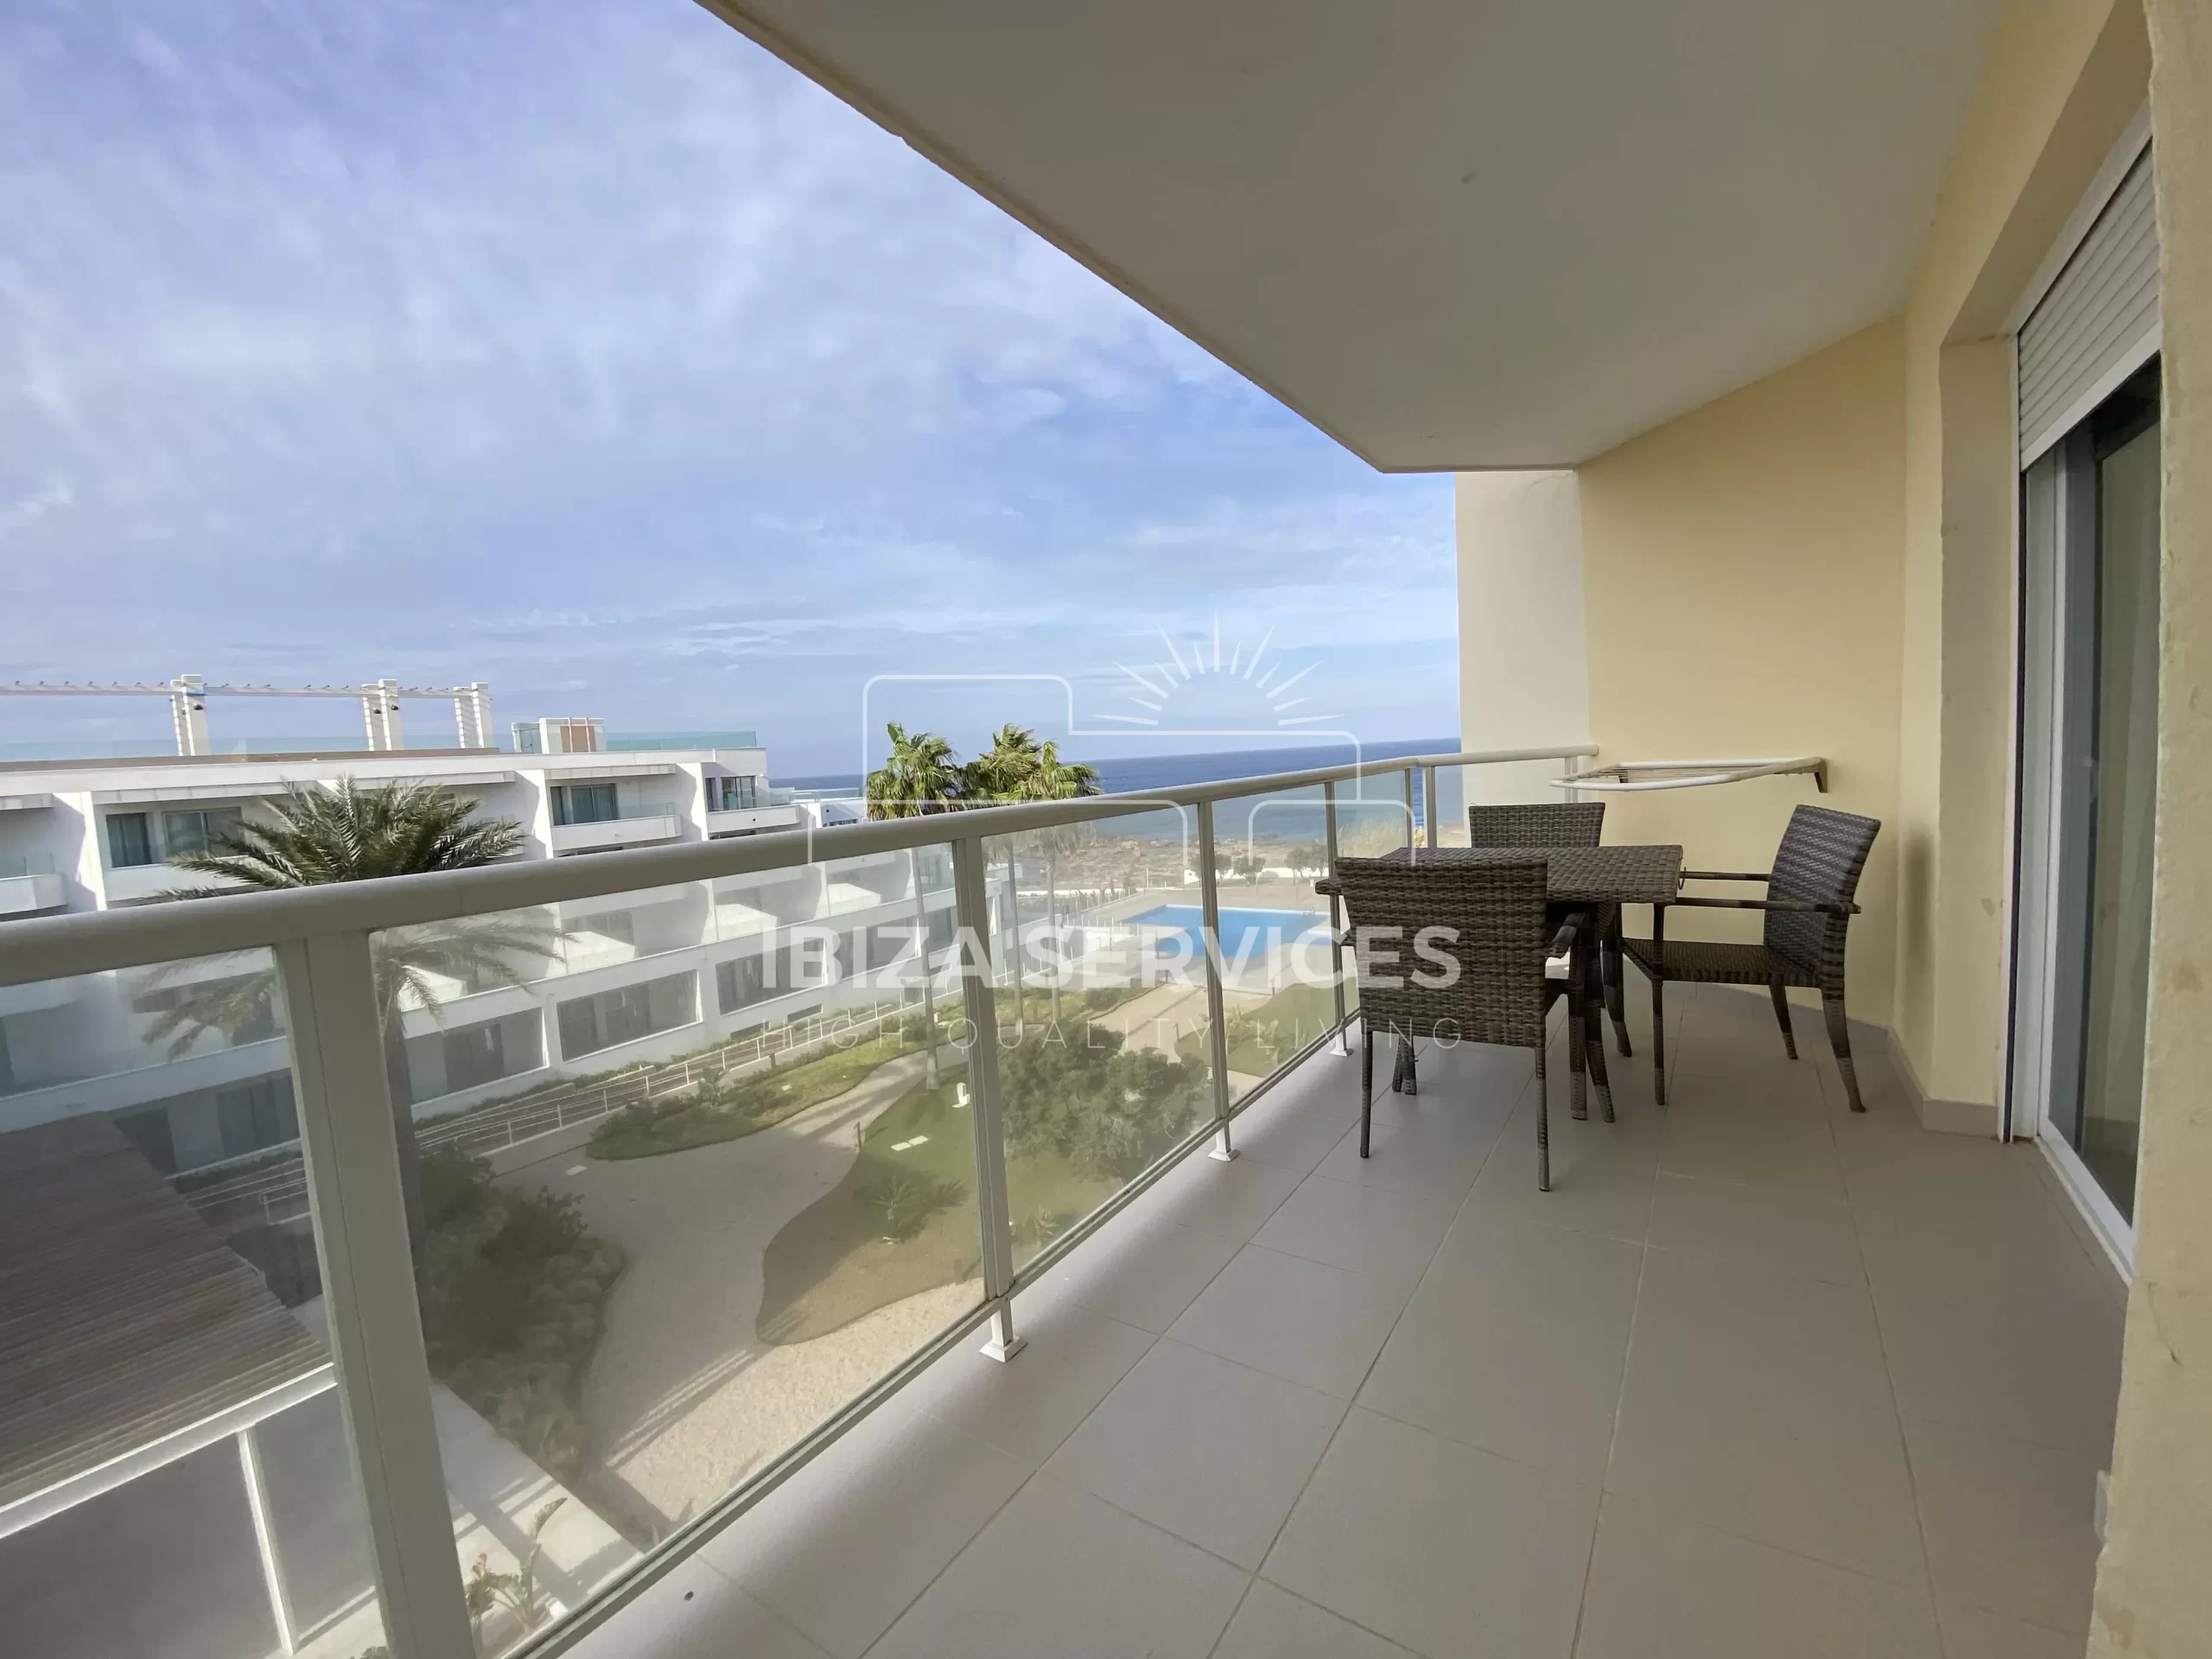 Seaview Tranquility: Enchanting Coastal Apartment For Sale.